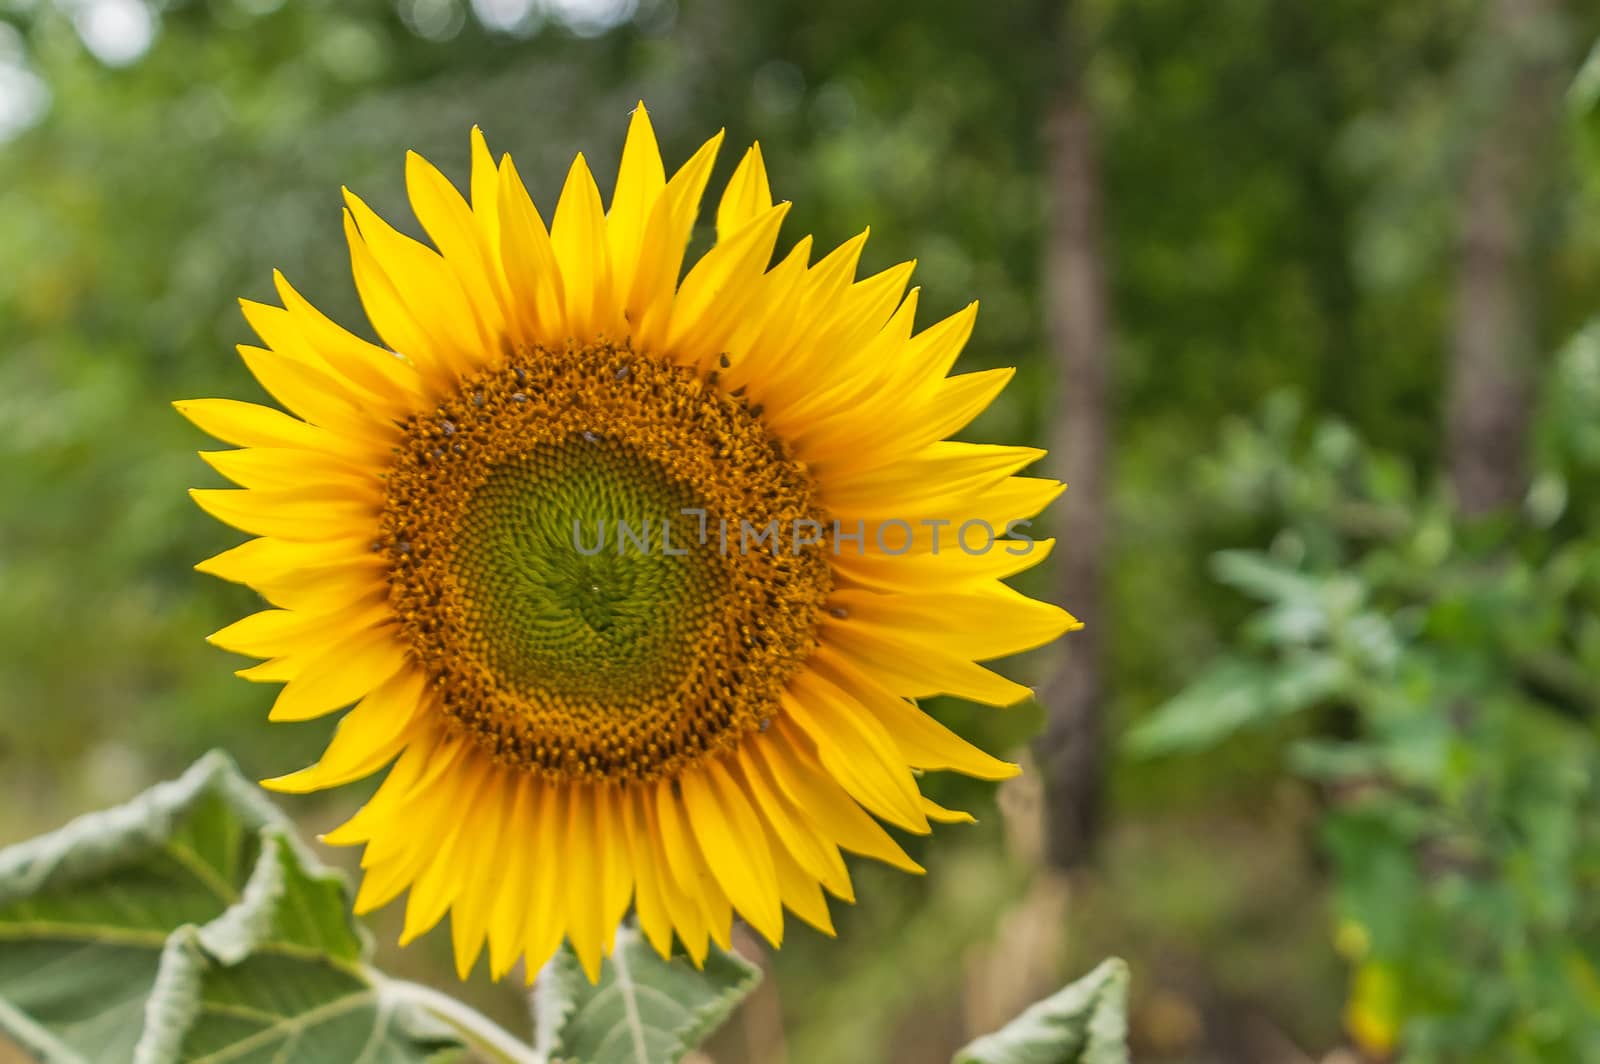 The flower of a yellow sunflower blossoming independently in the wood